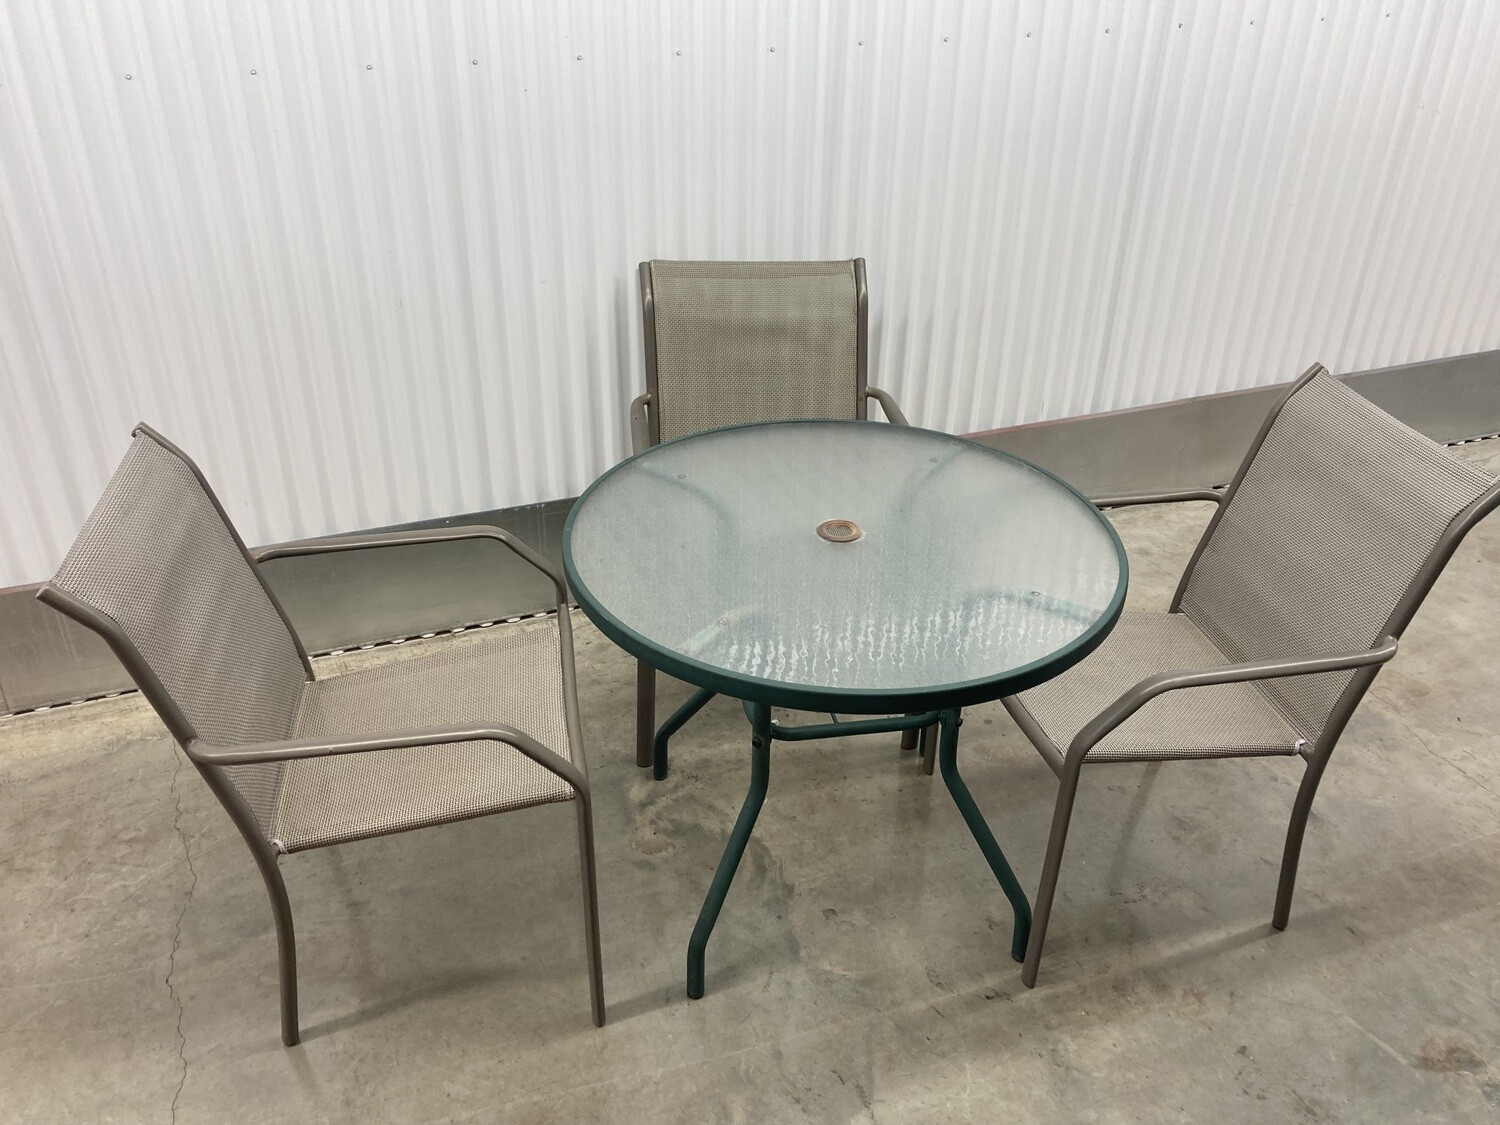 Outdoor Patio Table, 3 mesh chairs #2170